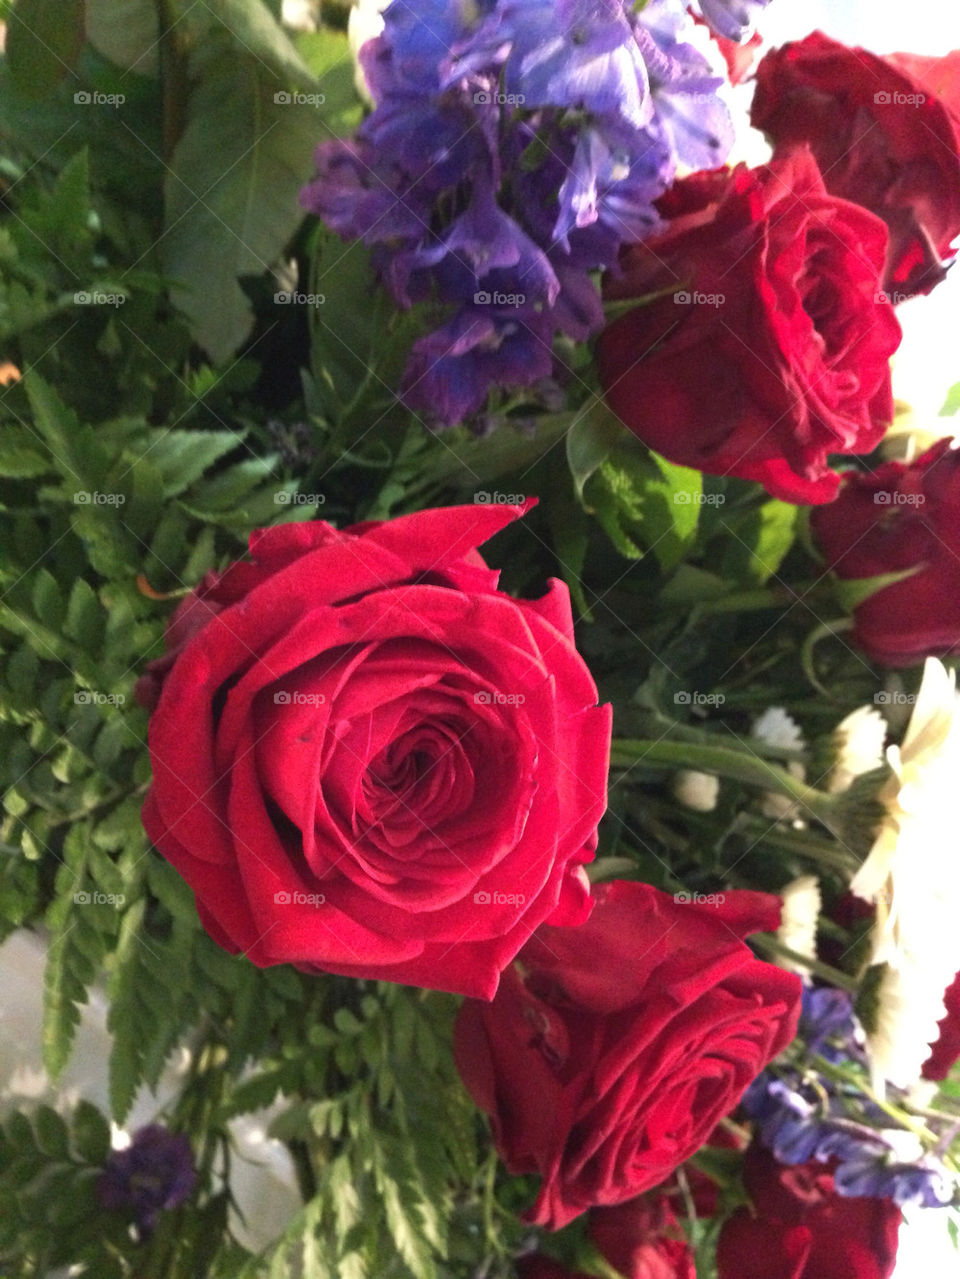 Some beautiful roses from a funeral